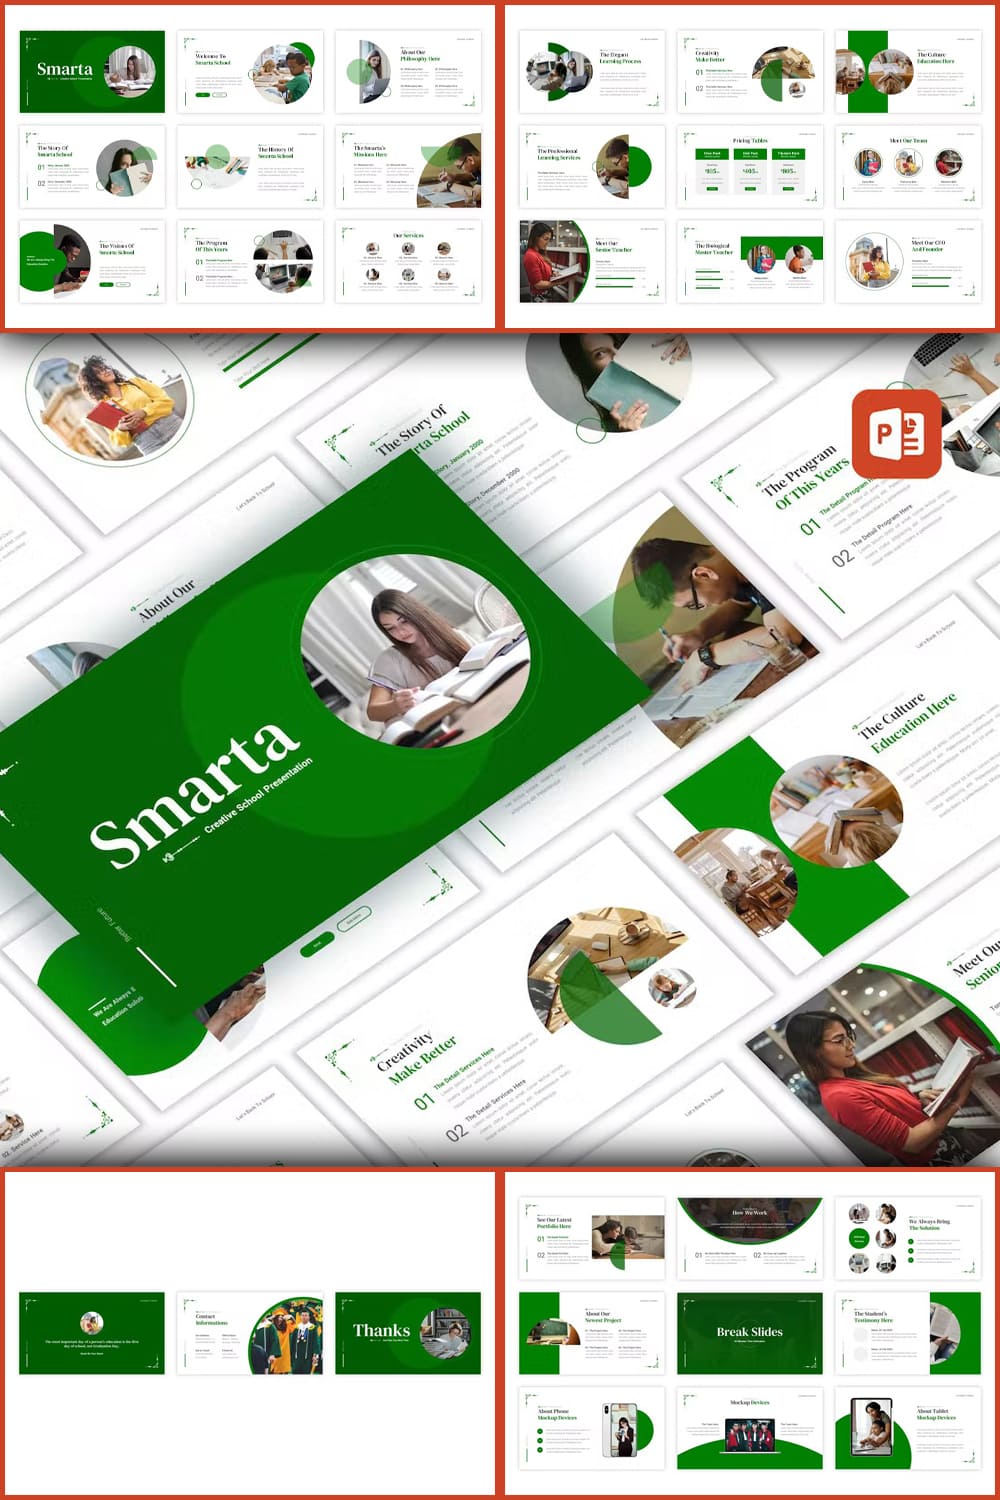 Set of images of amazing presentation template slides in green and white colors.